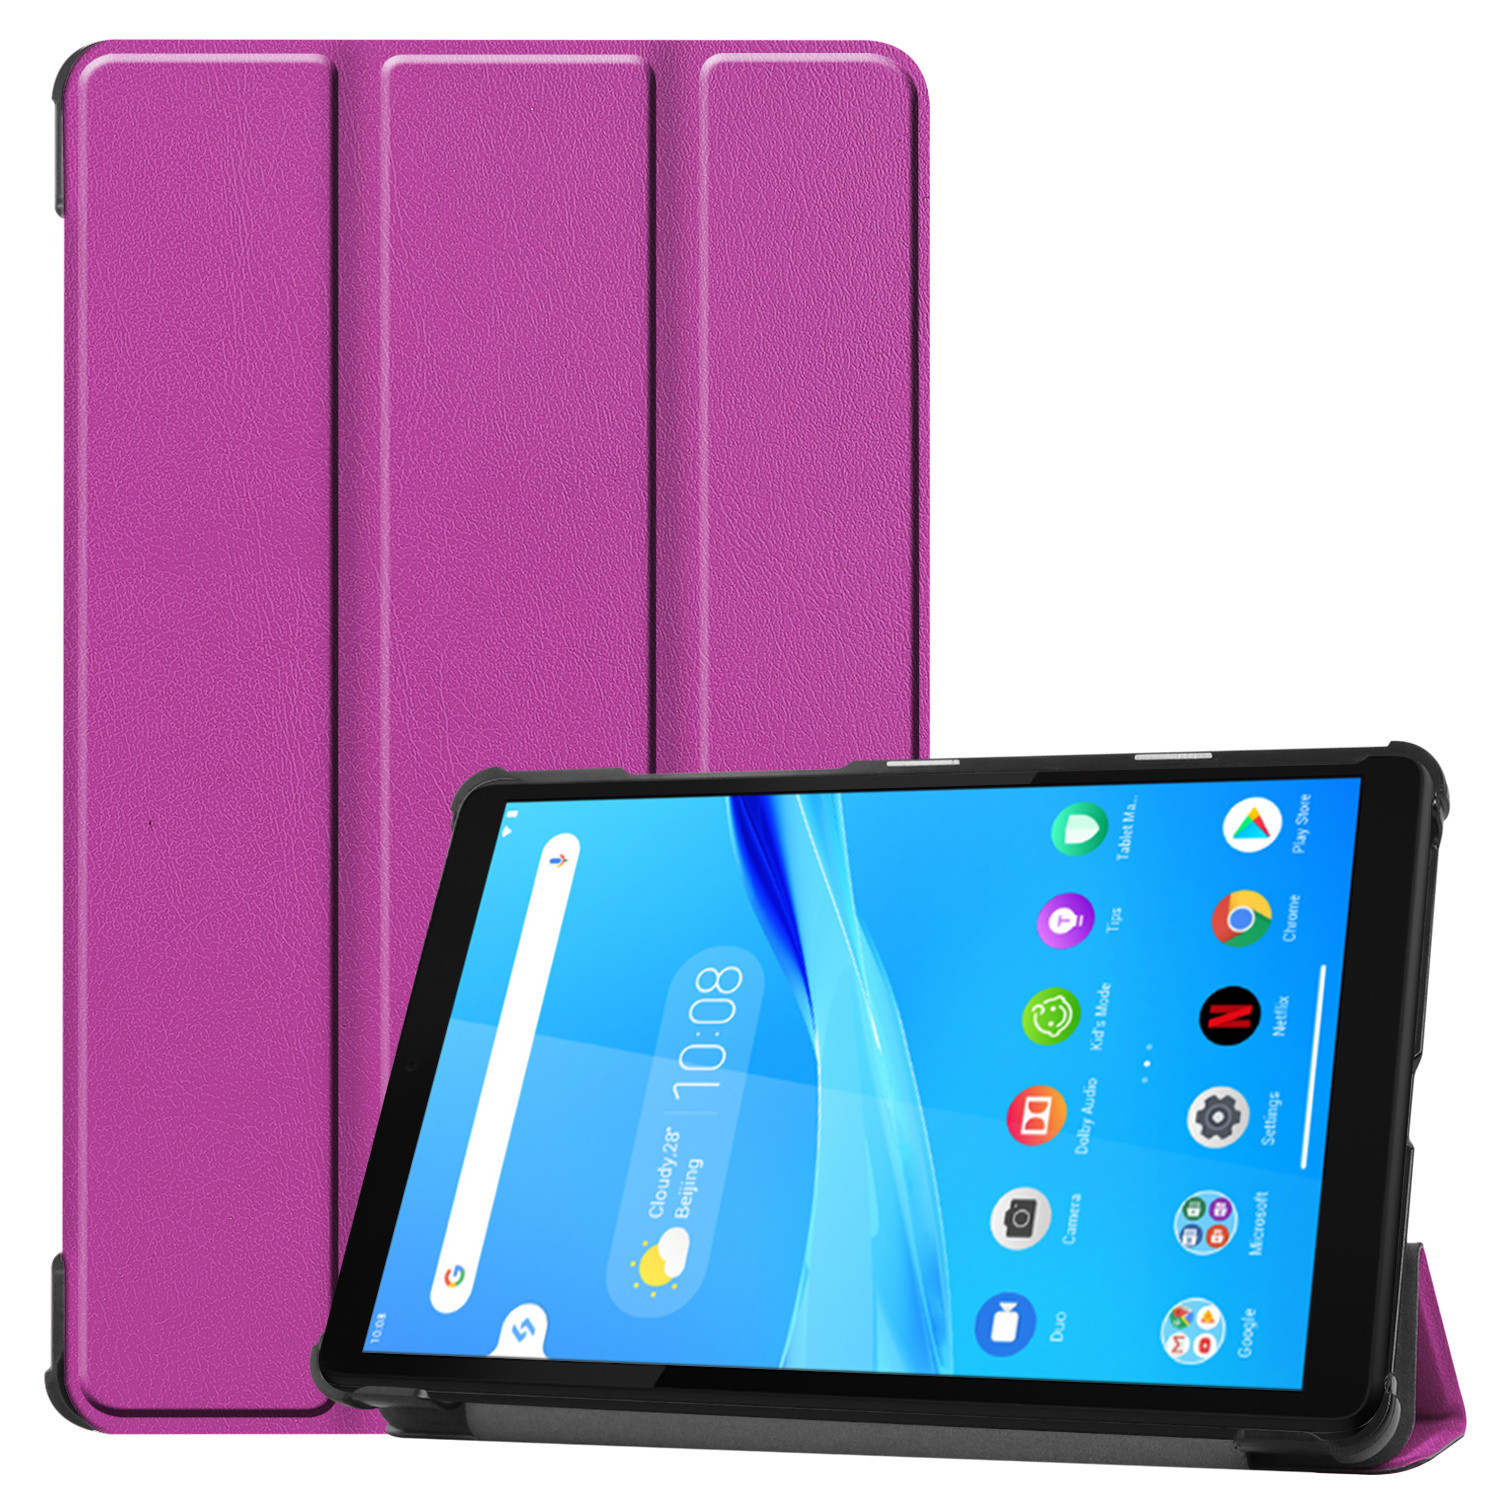 3-Vouw sleepcover hoes - Lenovo Tab M8 - Paars